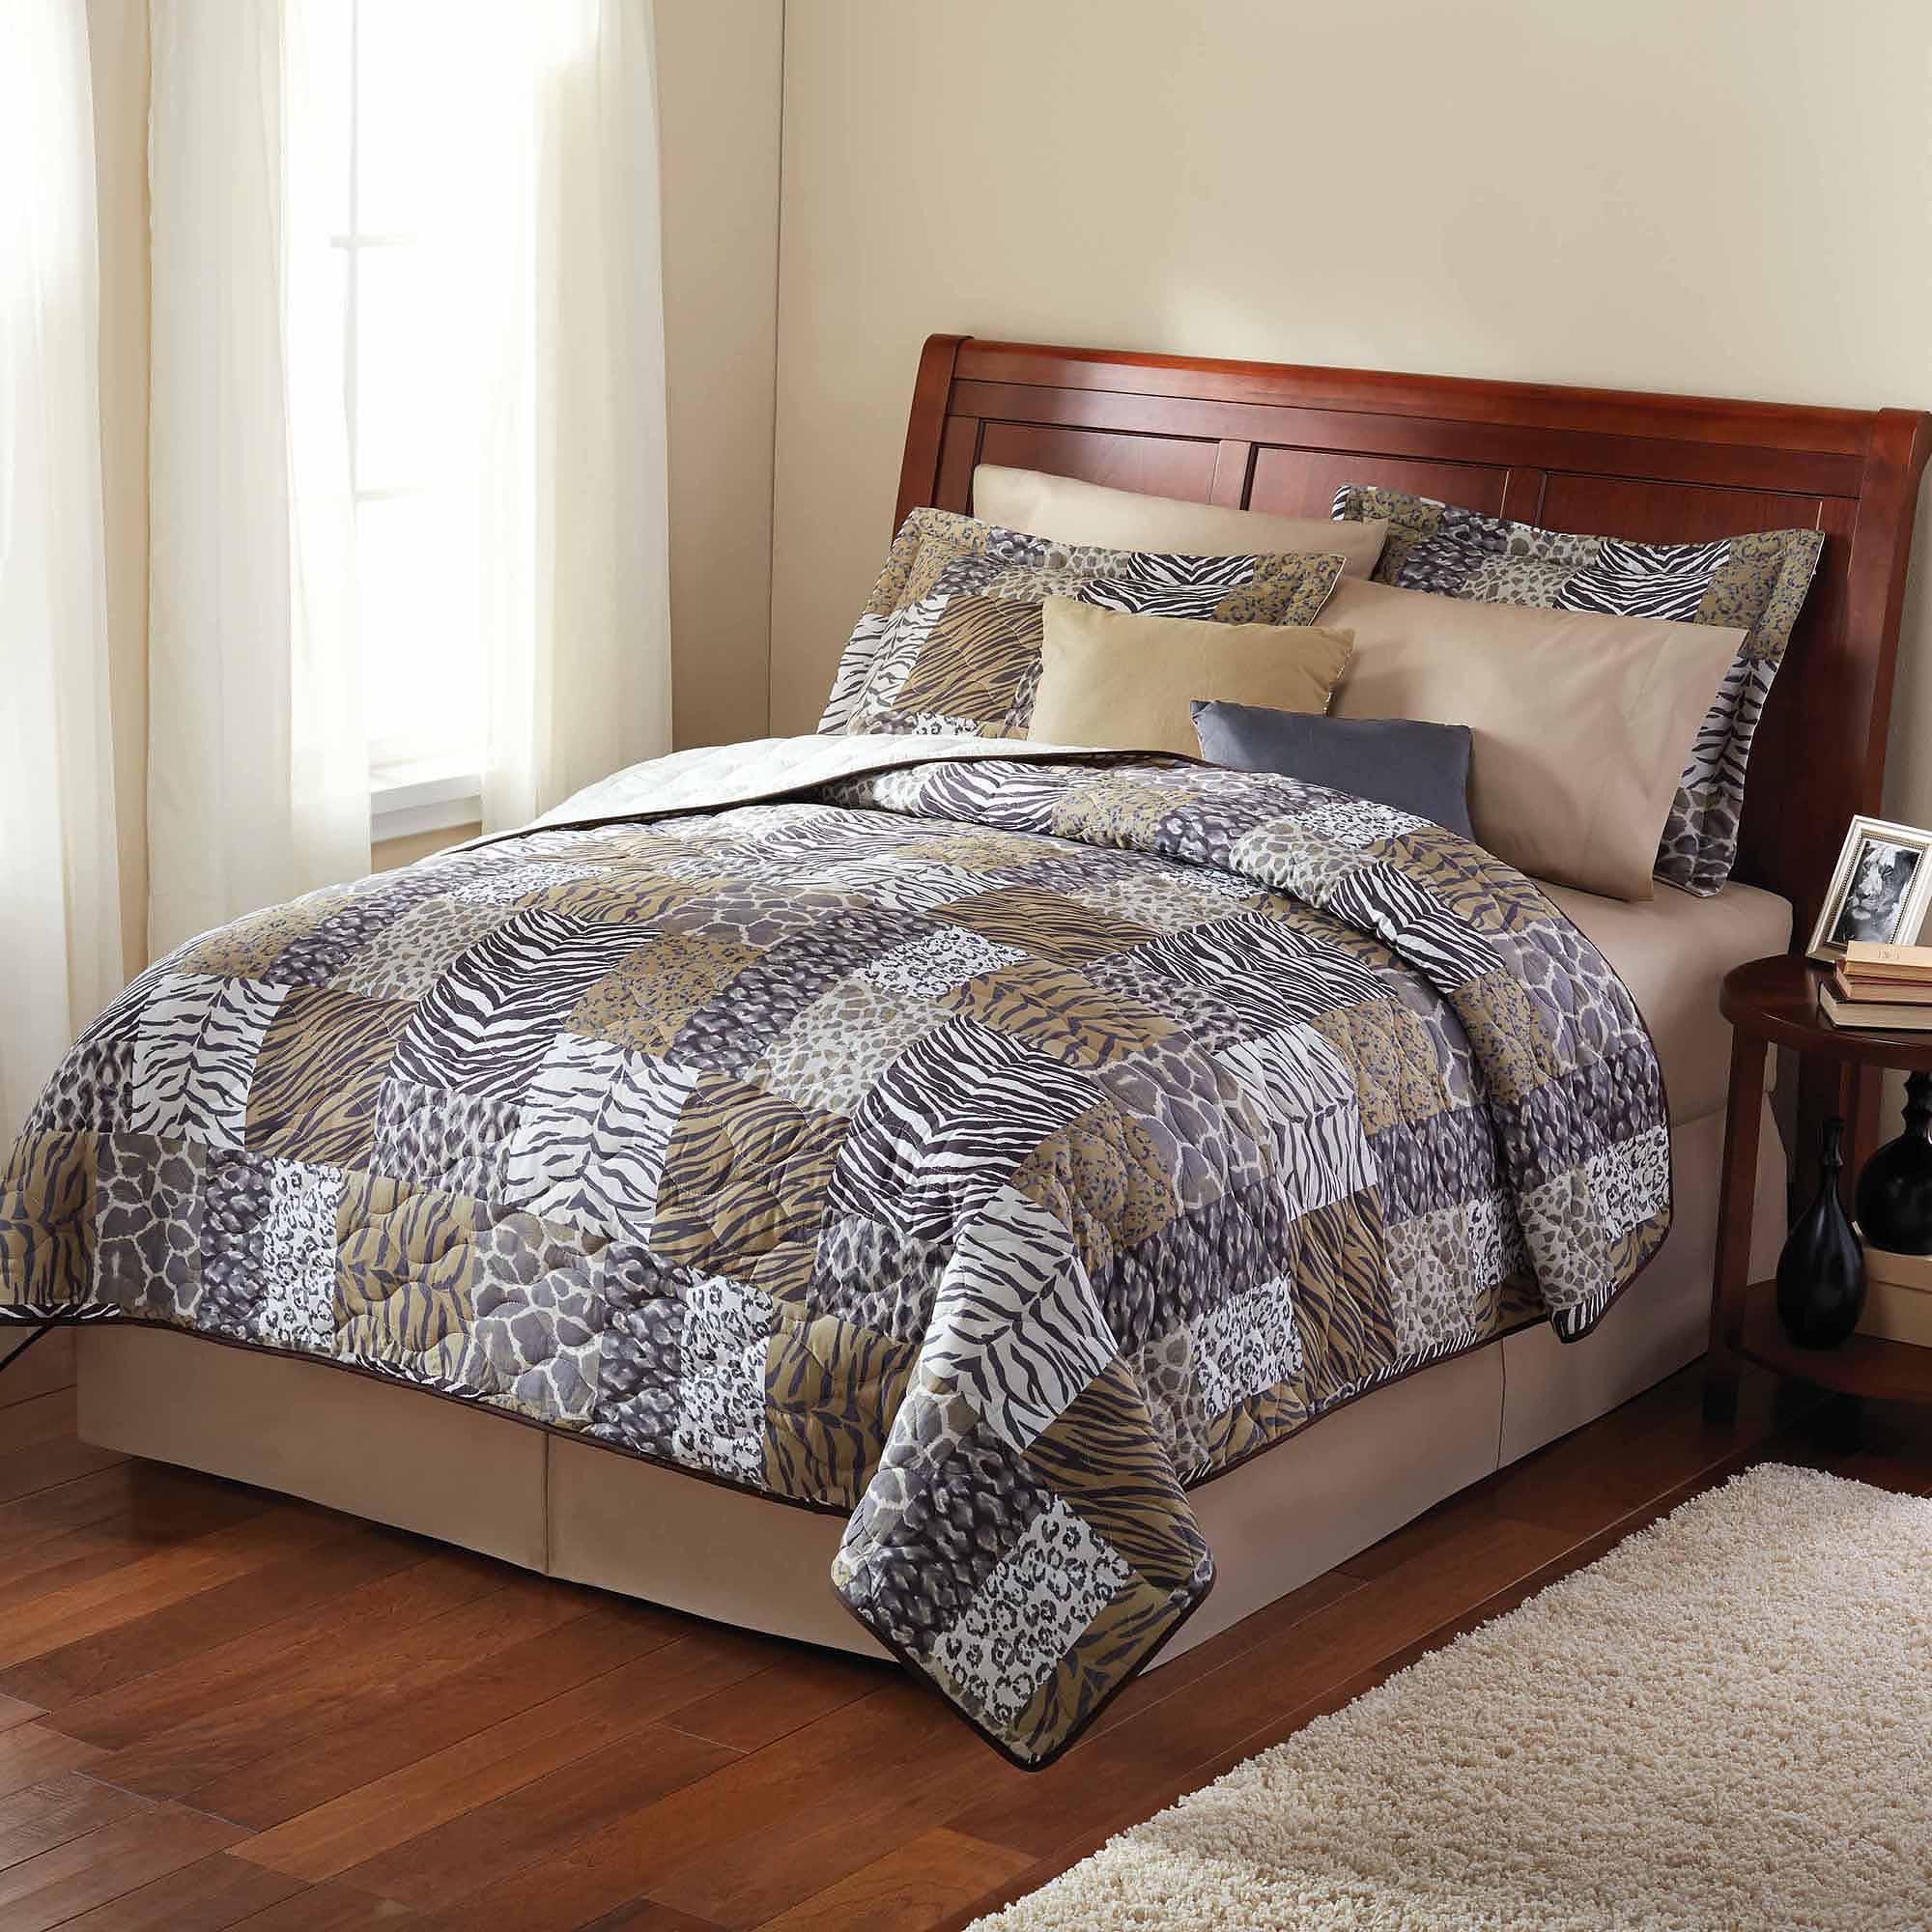 Mainstays Animal Patchwork Bedding Quilt, Brown - image 1 of 1